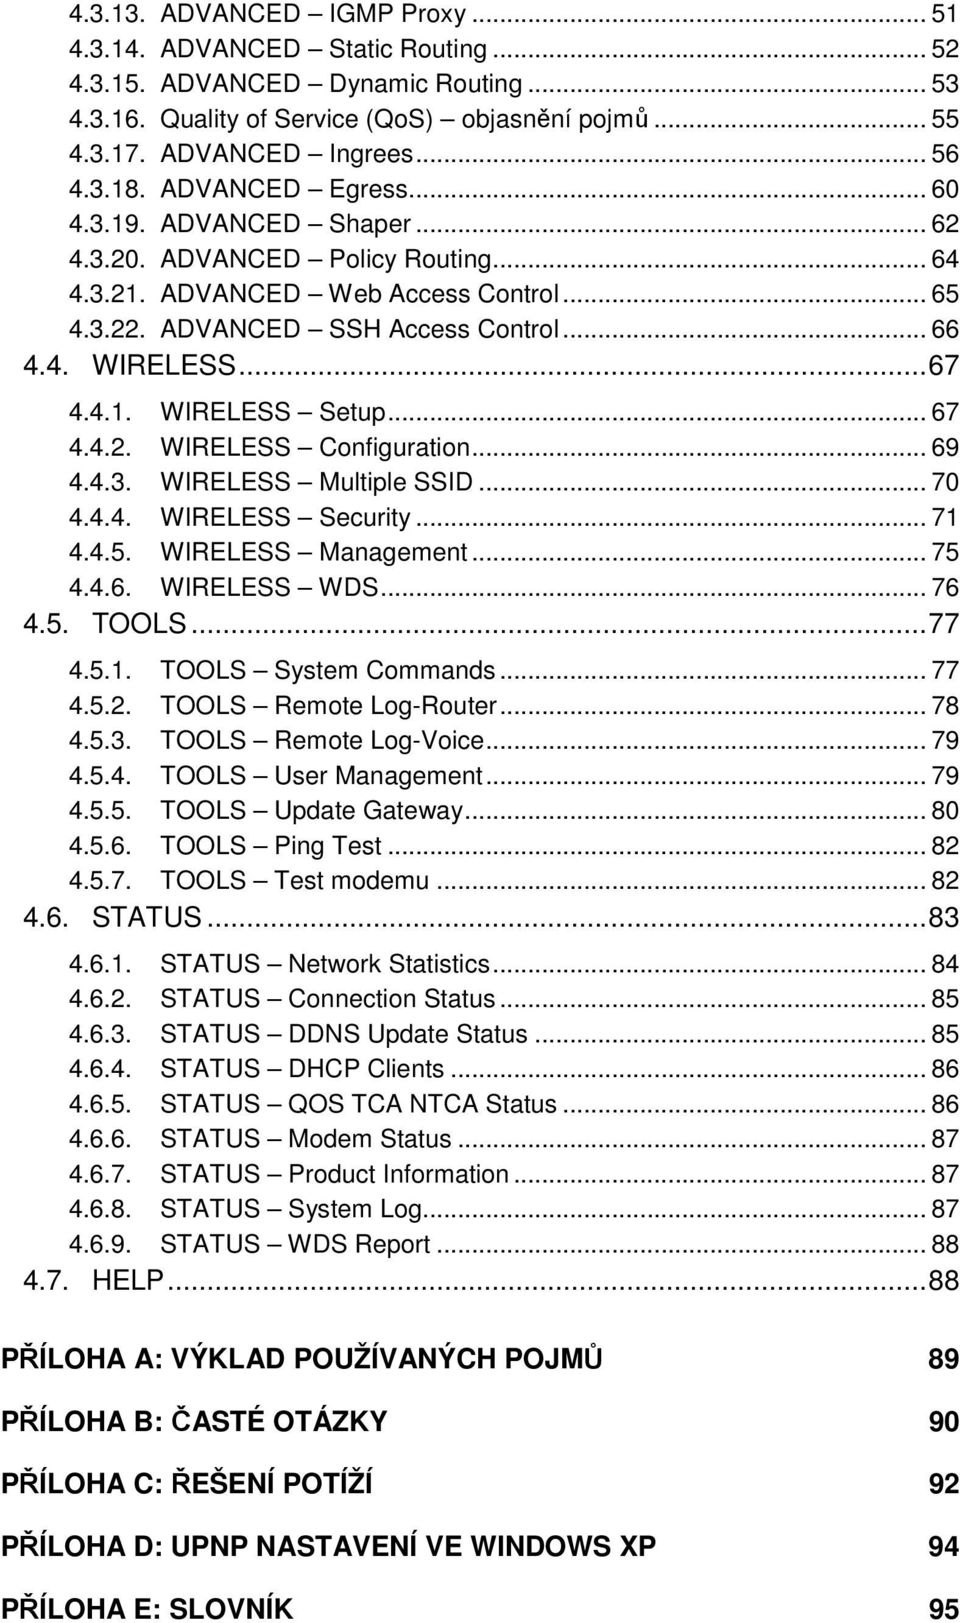 .. 67 4.4.2. WIRELESS Cnfiguratin... 69 4.4.3. WIRELESS Multiple SSID... 70 4.4.4. WIRELESS Security... 71 4.4.5. WIRELESS Management... 75 4.4.6. WIRELESS WDS... 76 4.5. TOOLS...77 4.5.1. TOOLS System Cmmands.